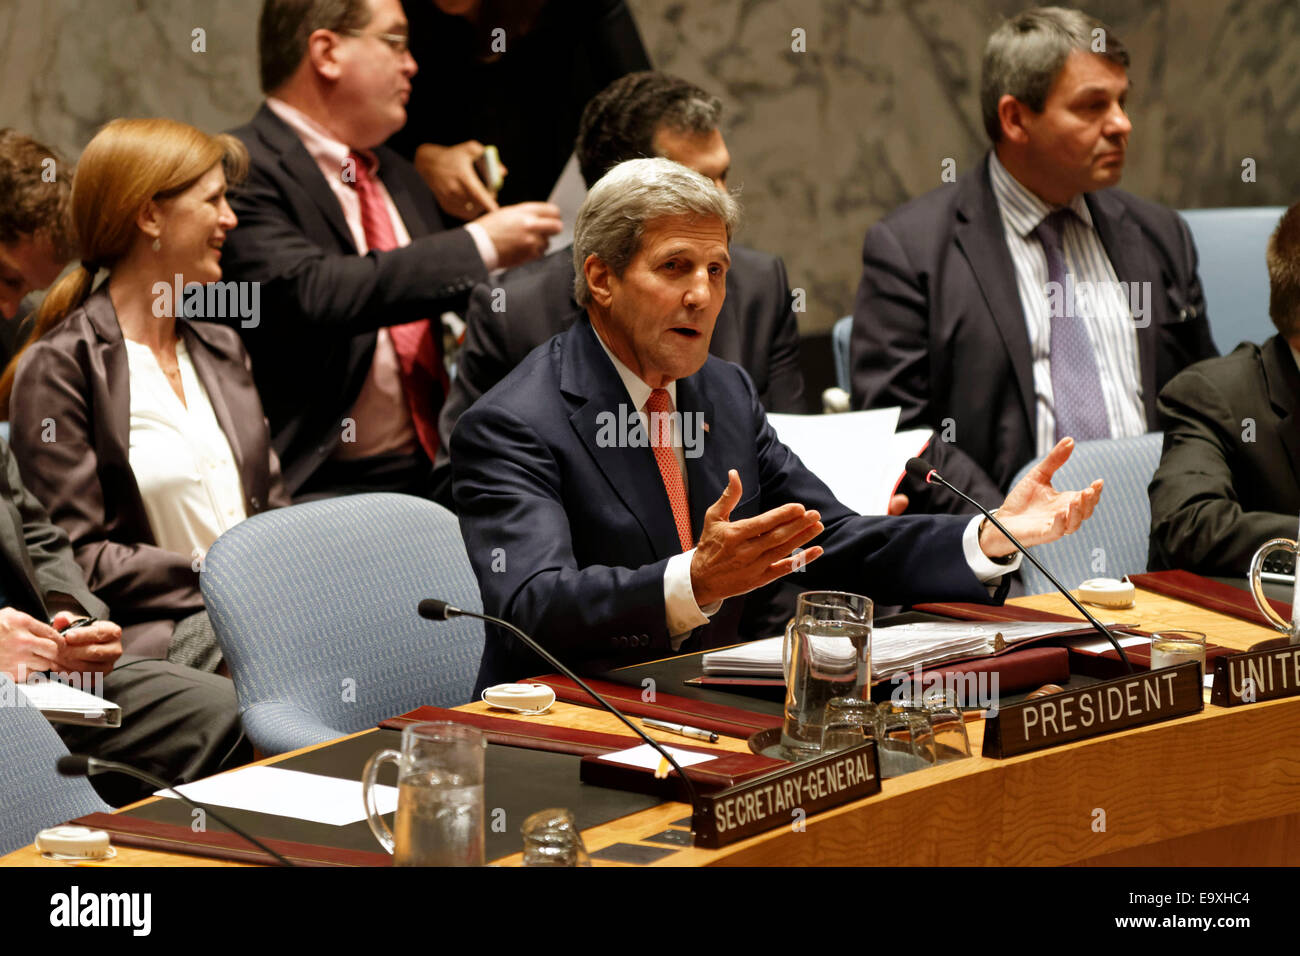 United States' Secretary of State John Kerry chairs a meeting of the Security Council at UN Headquarters in New York. Stock Photo